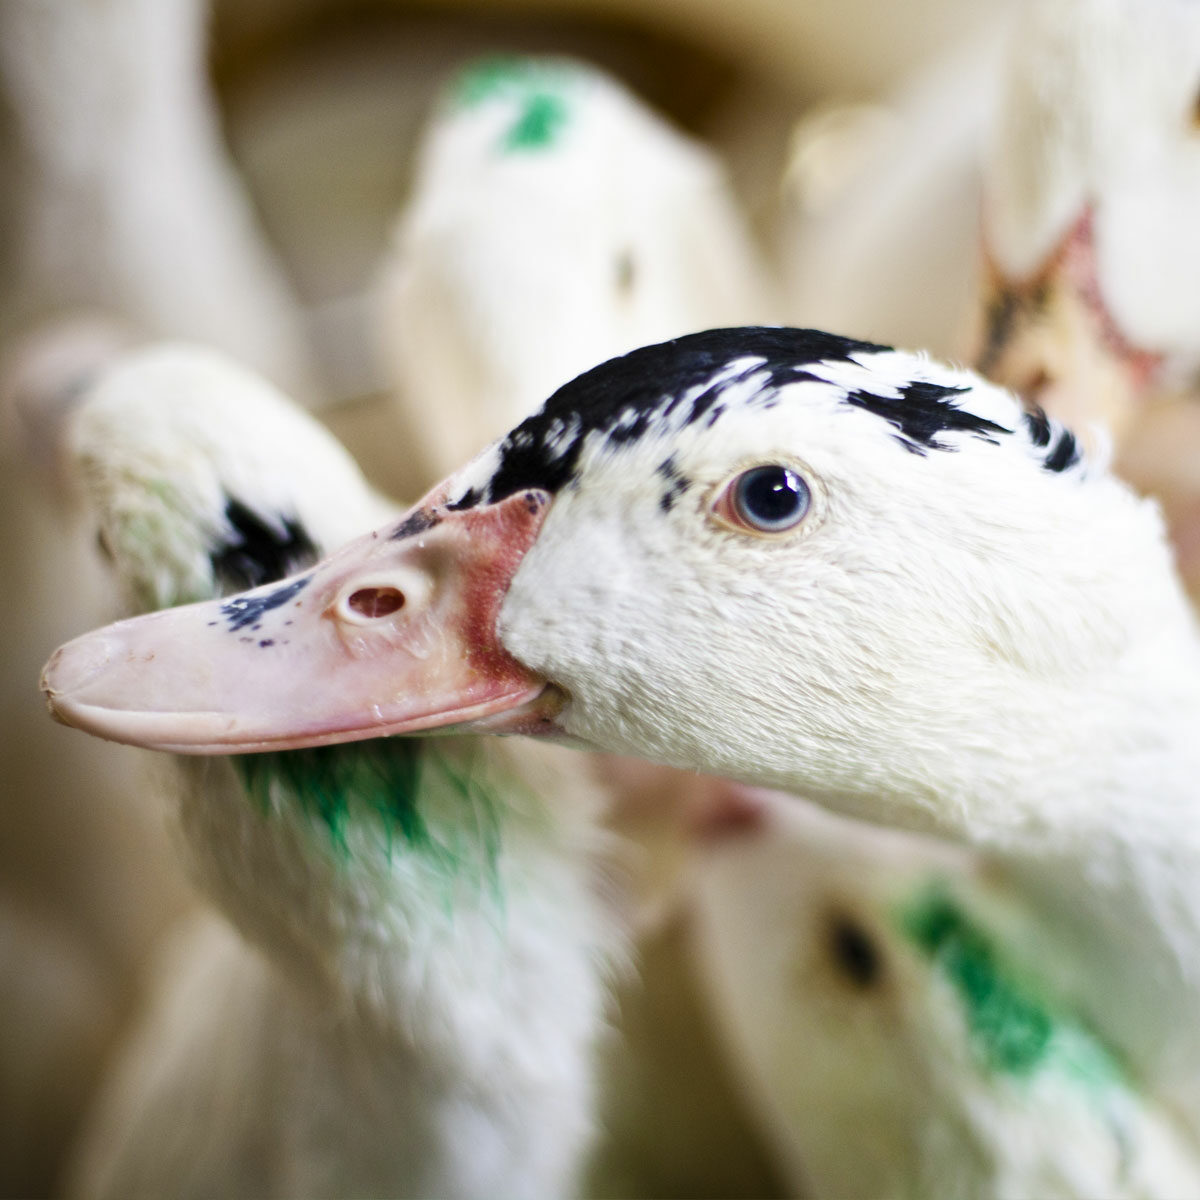 Is foie gras illegal in the US?